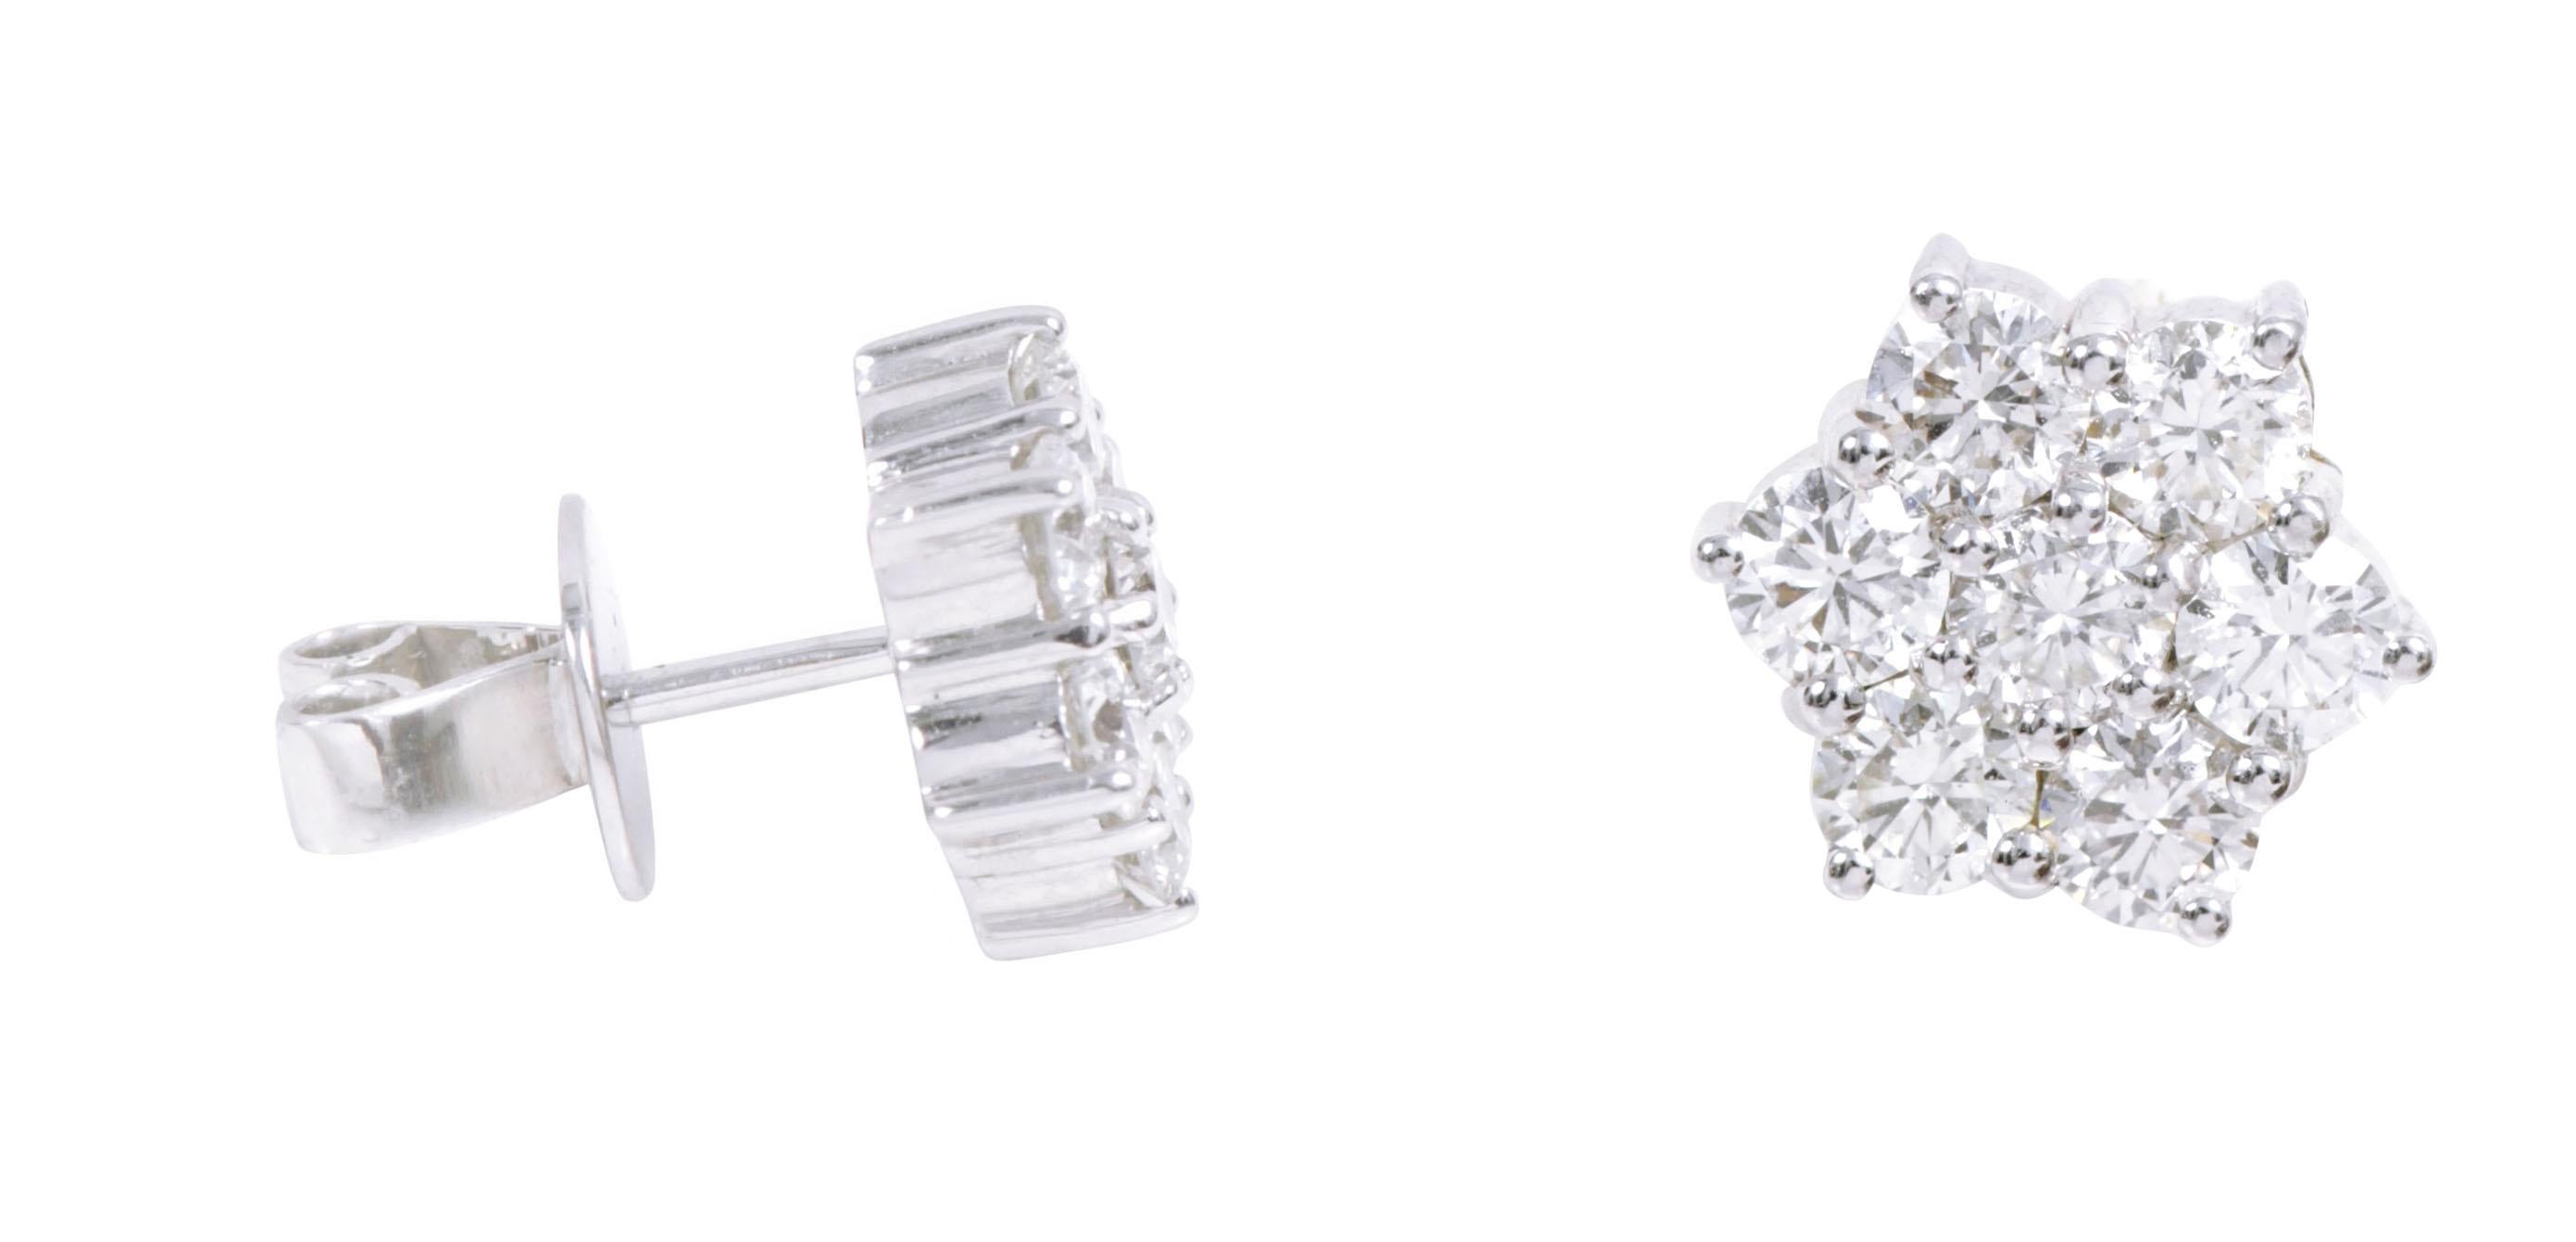 18 Karat White Gold 2.25 Carat Diamond Stud Earrings 

This timeless invisible setting round diamond stud earring is sensational. It’s a sophisticated and very intricate design setting wherein 7 identical round diamonds are carefully combined to